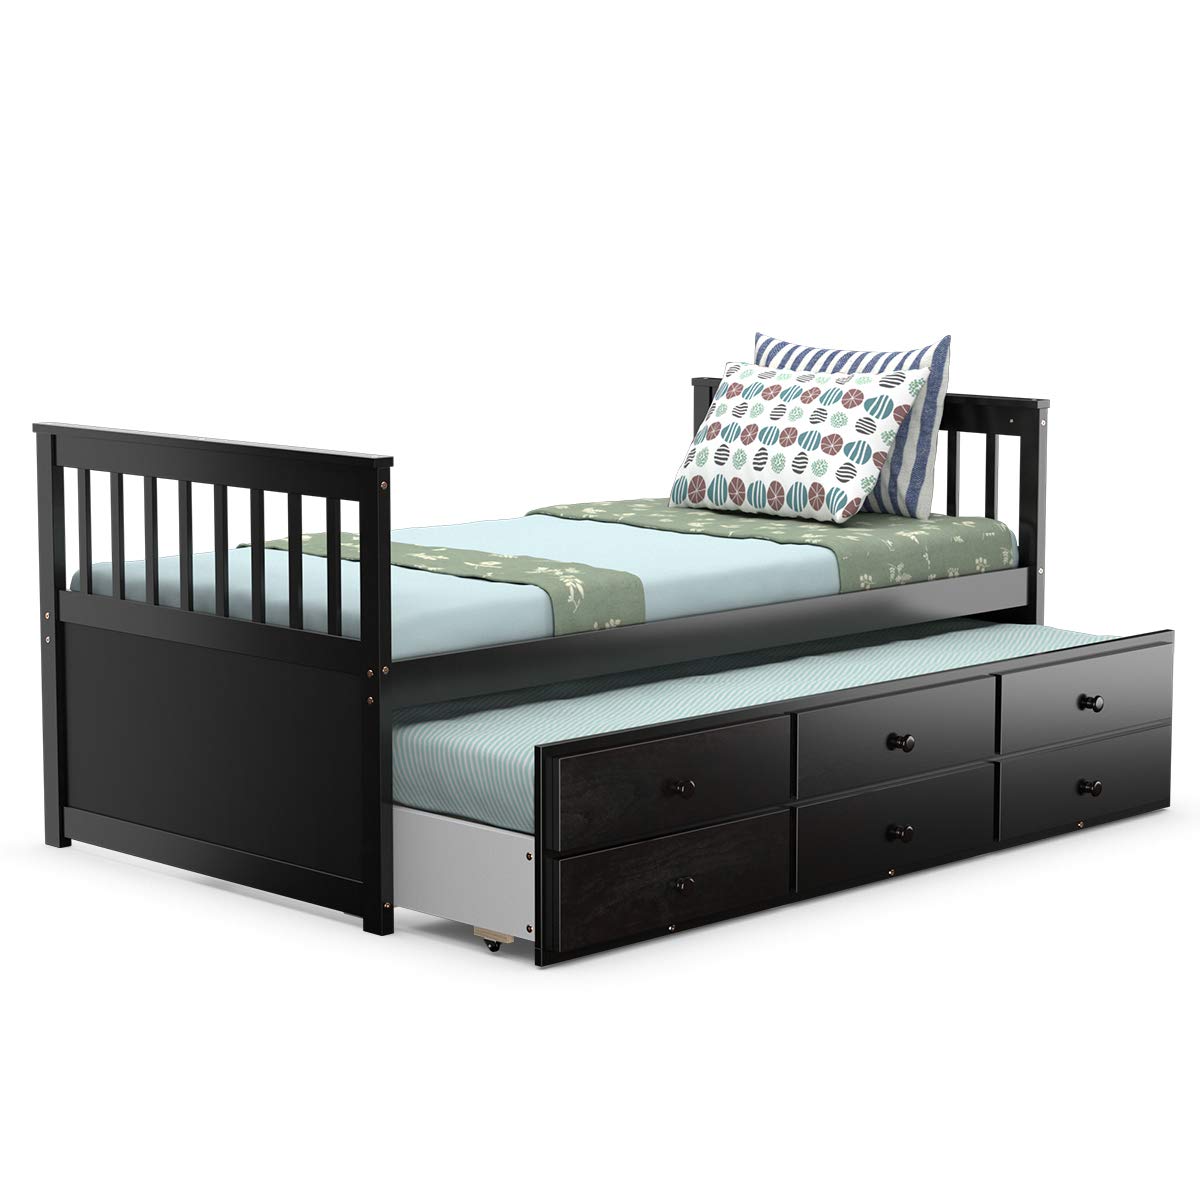 Giantex Twin Captain's Bed with Trundle Bed, Wood Storage Daybed with 3 Storage Drawers